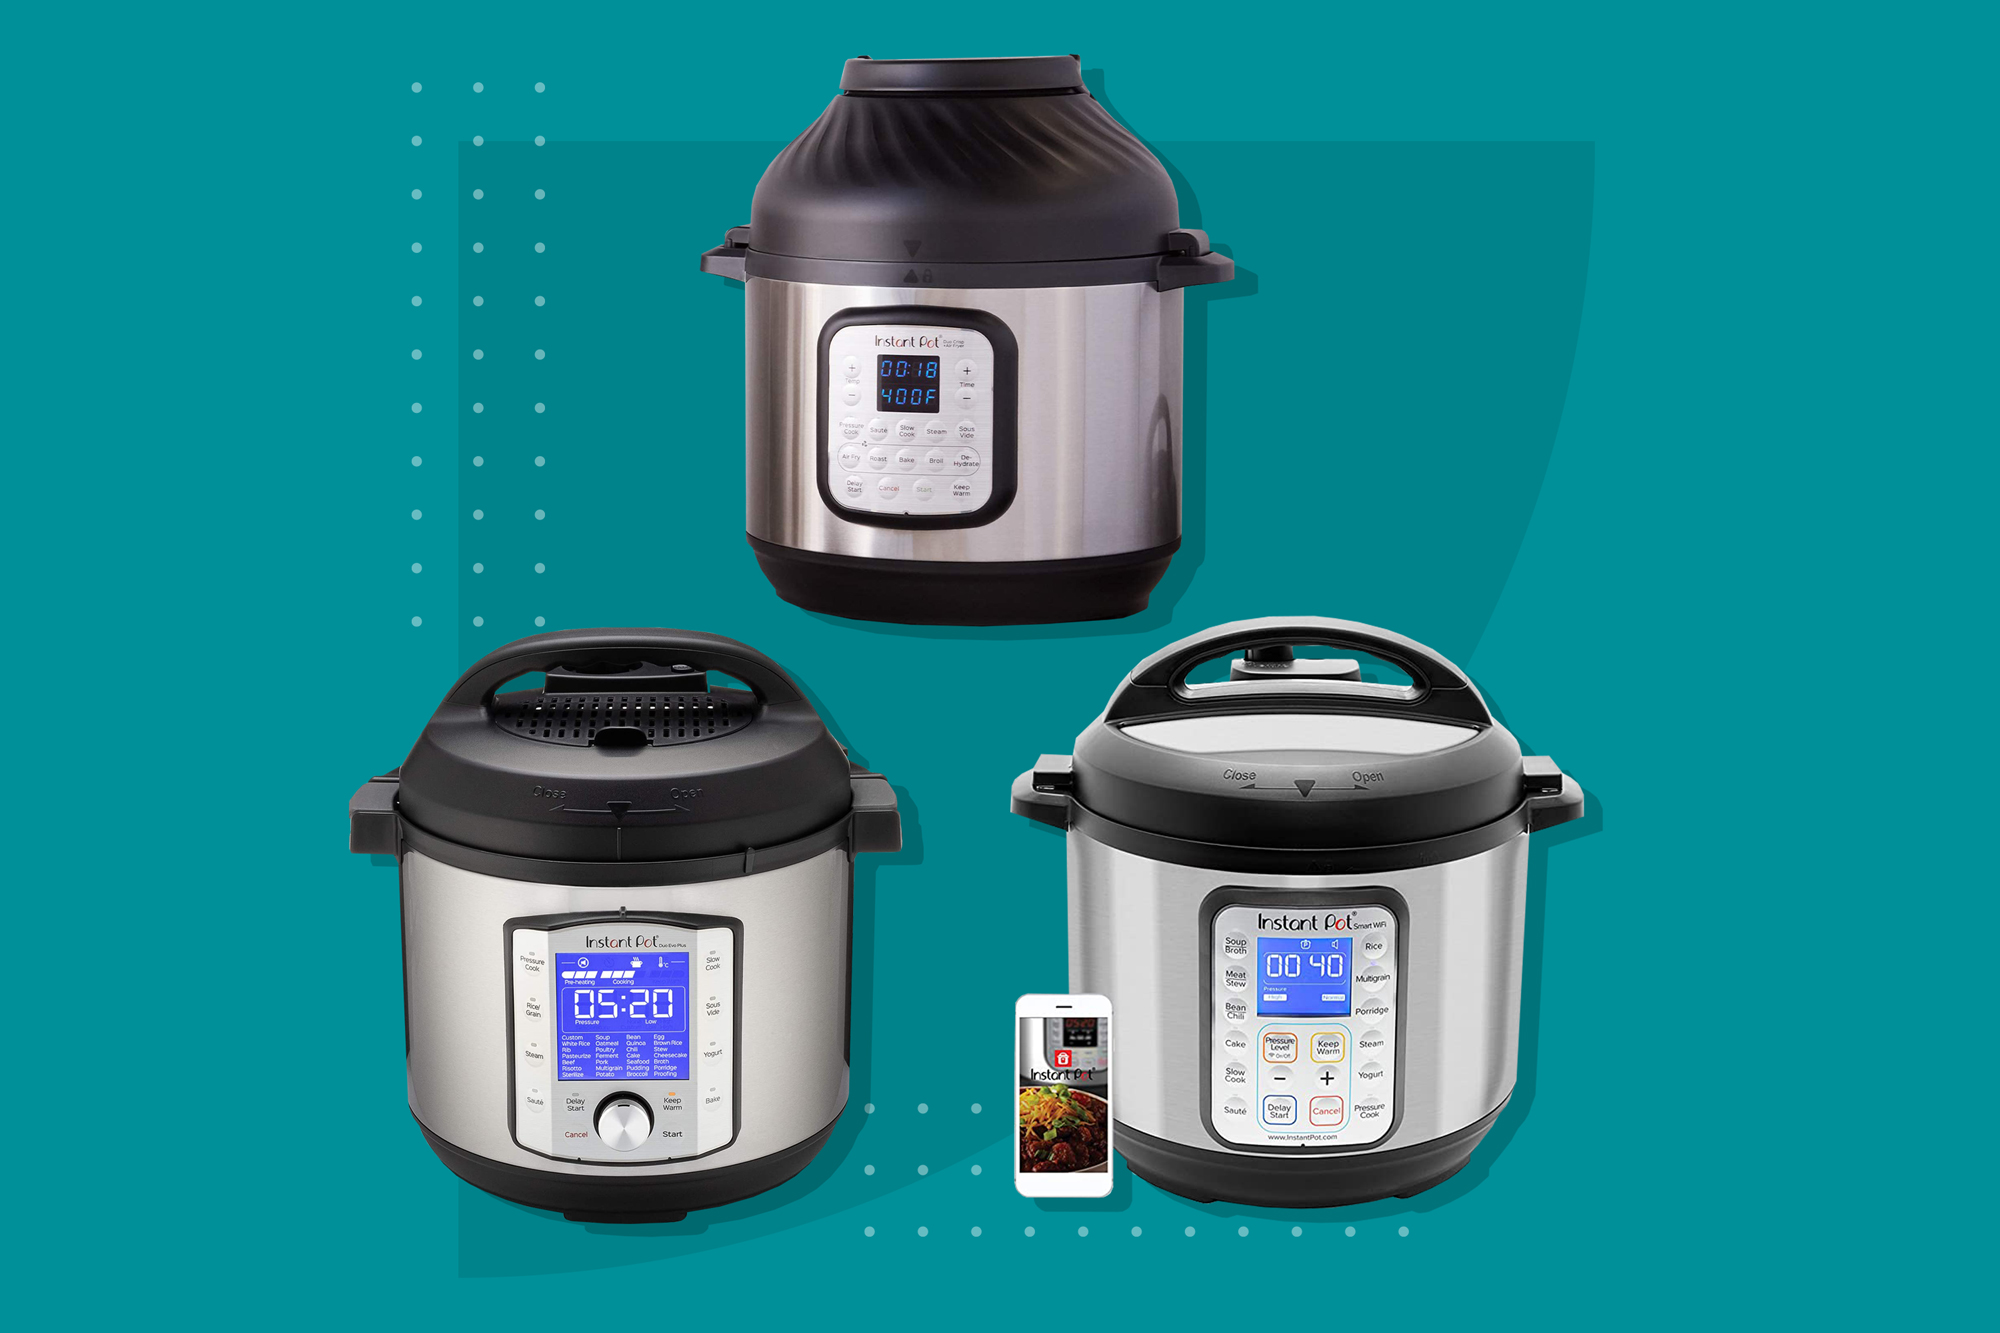 Crock-Pot Smart Wifi-Enabled Slow Cooker - IoT - Internet of Things